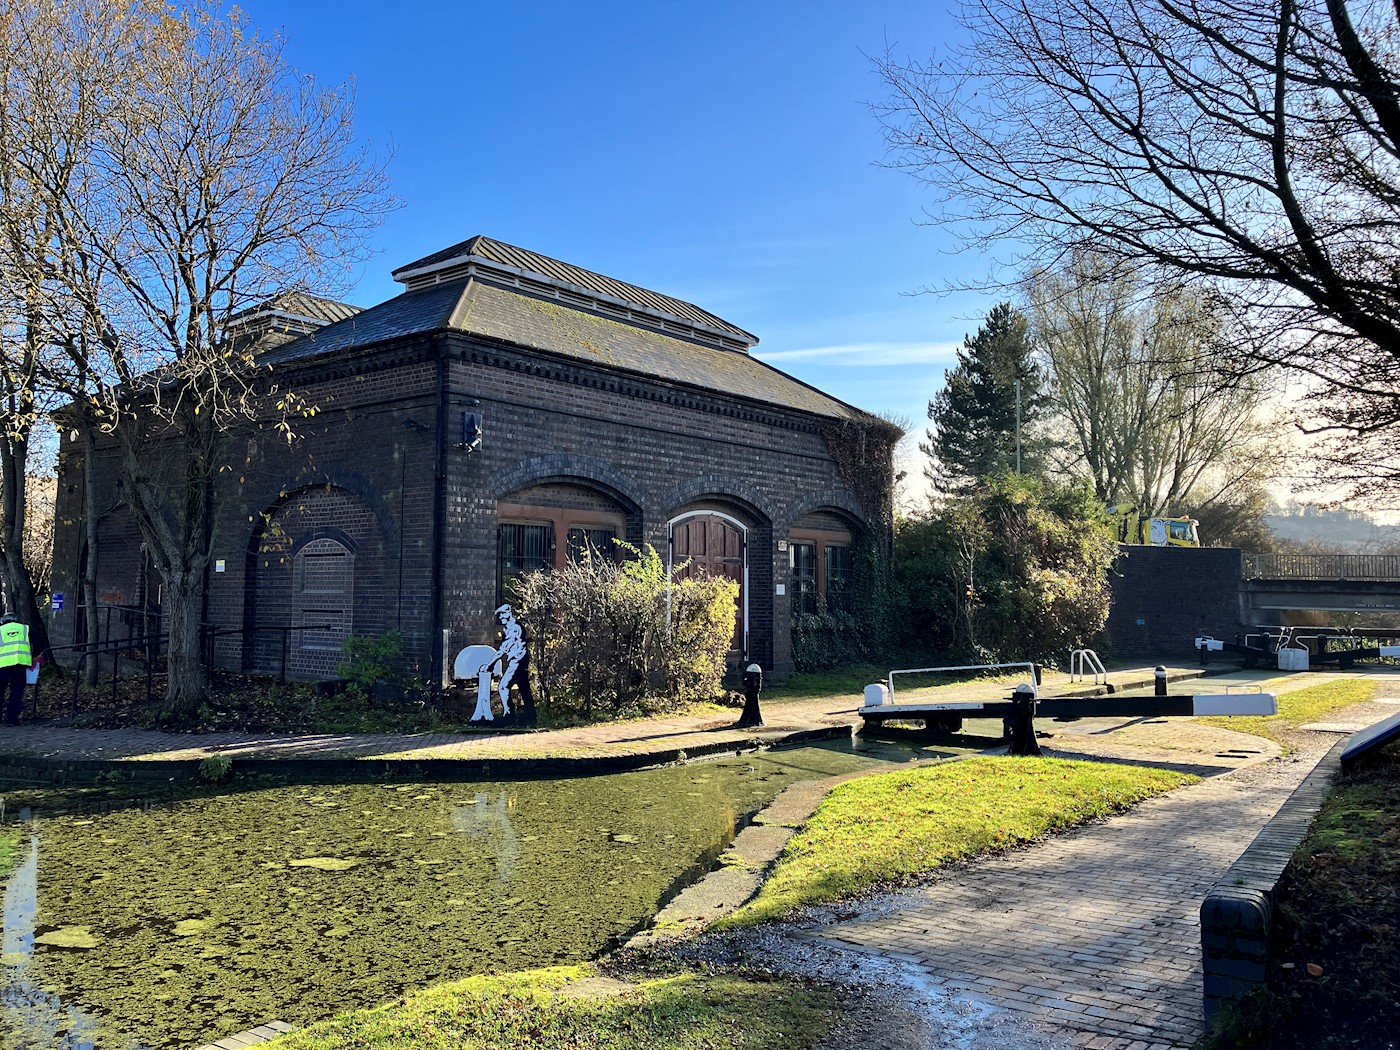 Parkhead Pumphouse (also known as Blowers Green Pumphouse), Peartree Lane, Dudley, DY2 0XP 1/25